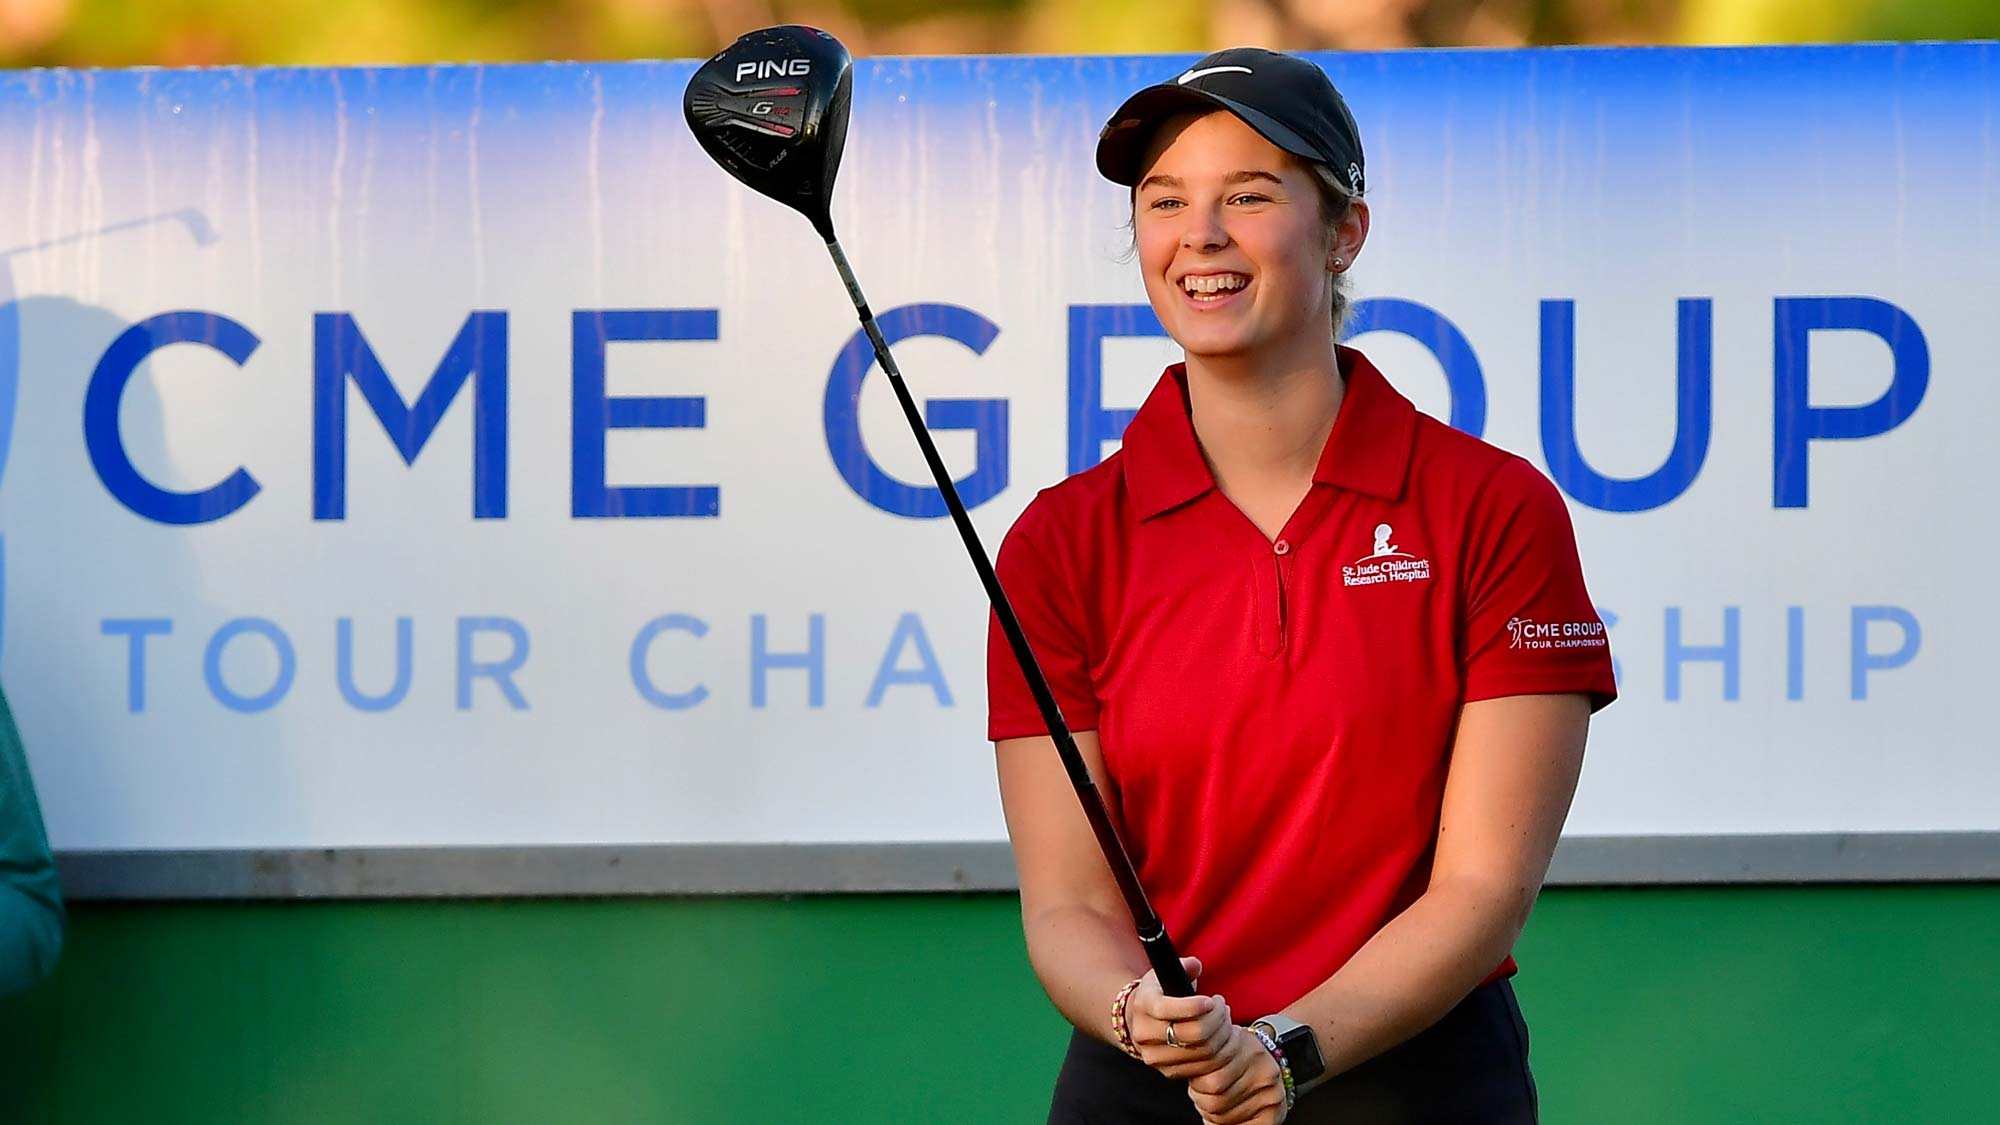 Mary Browder at the 2019 CME Group Tour Championship